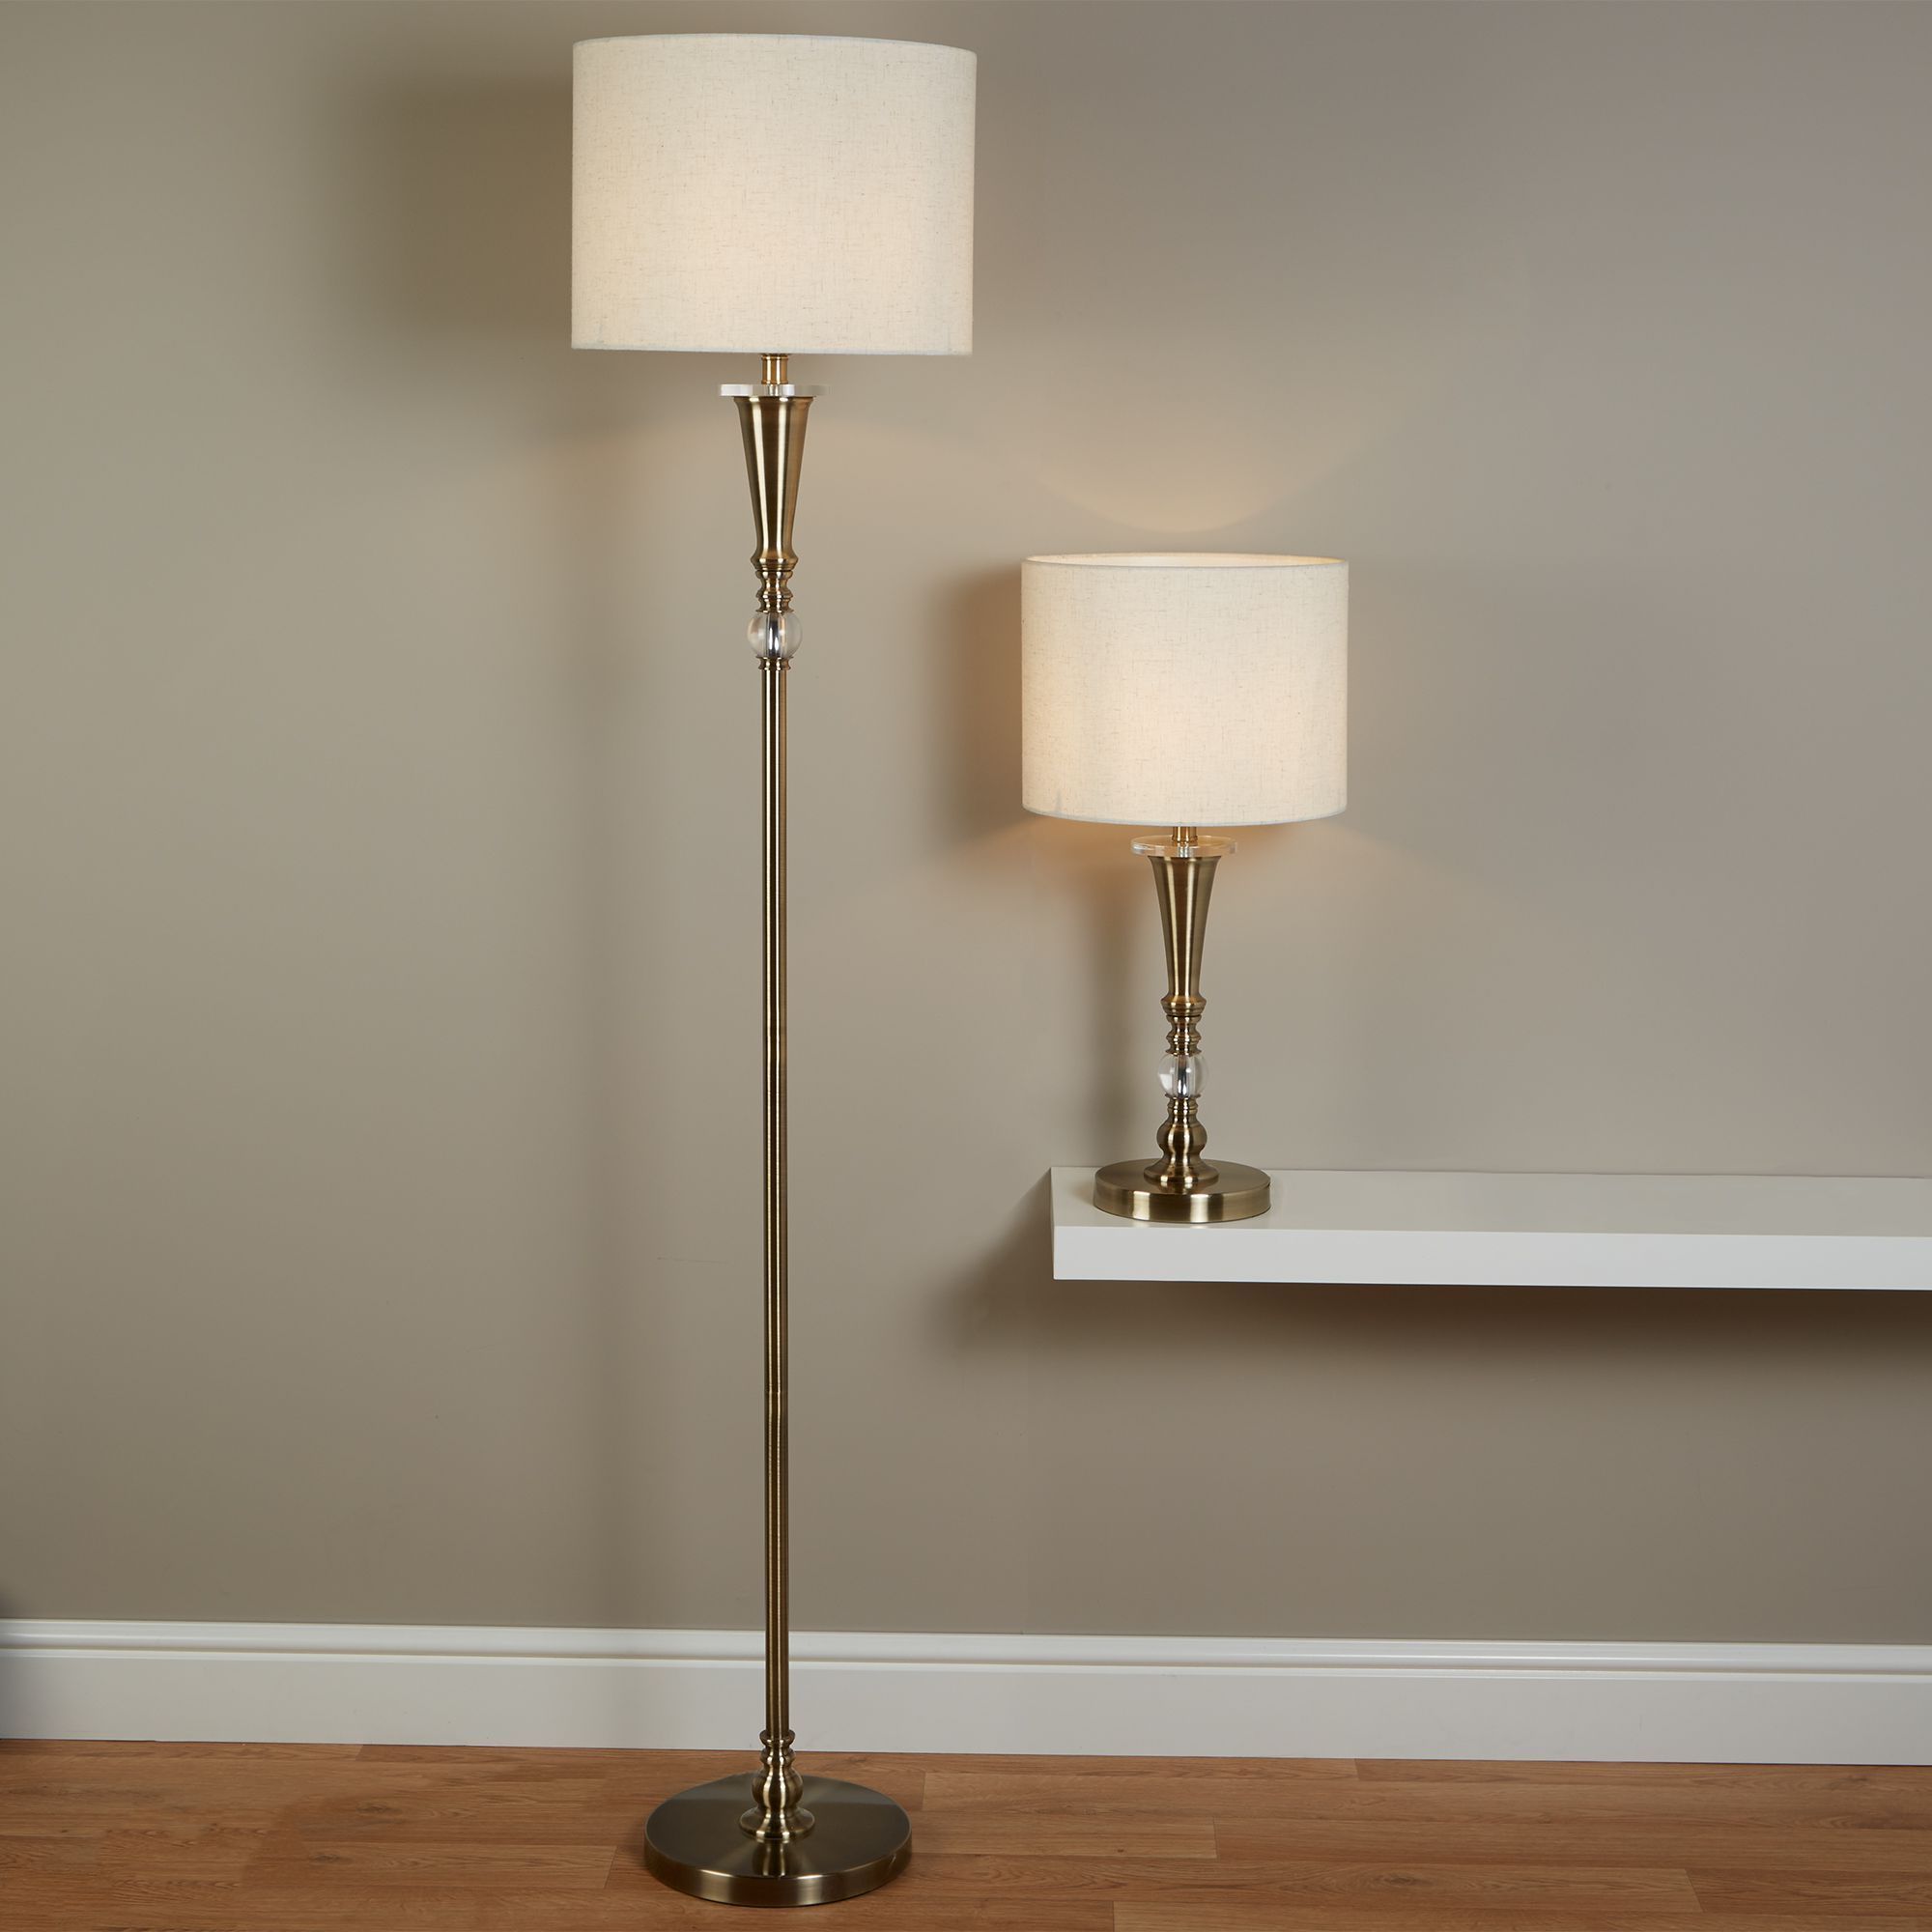 Searchlight Lighting 1012ab Drum Single Light Floor Lamp Intended For Most Popular Oatmeal Linen Shade Chandeliers (View 4 of 20)